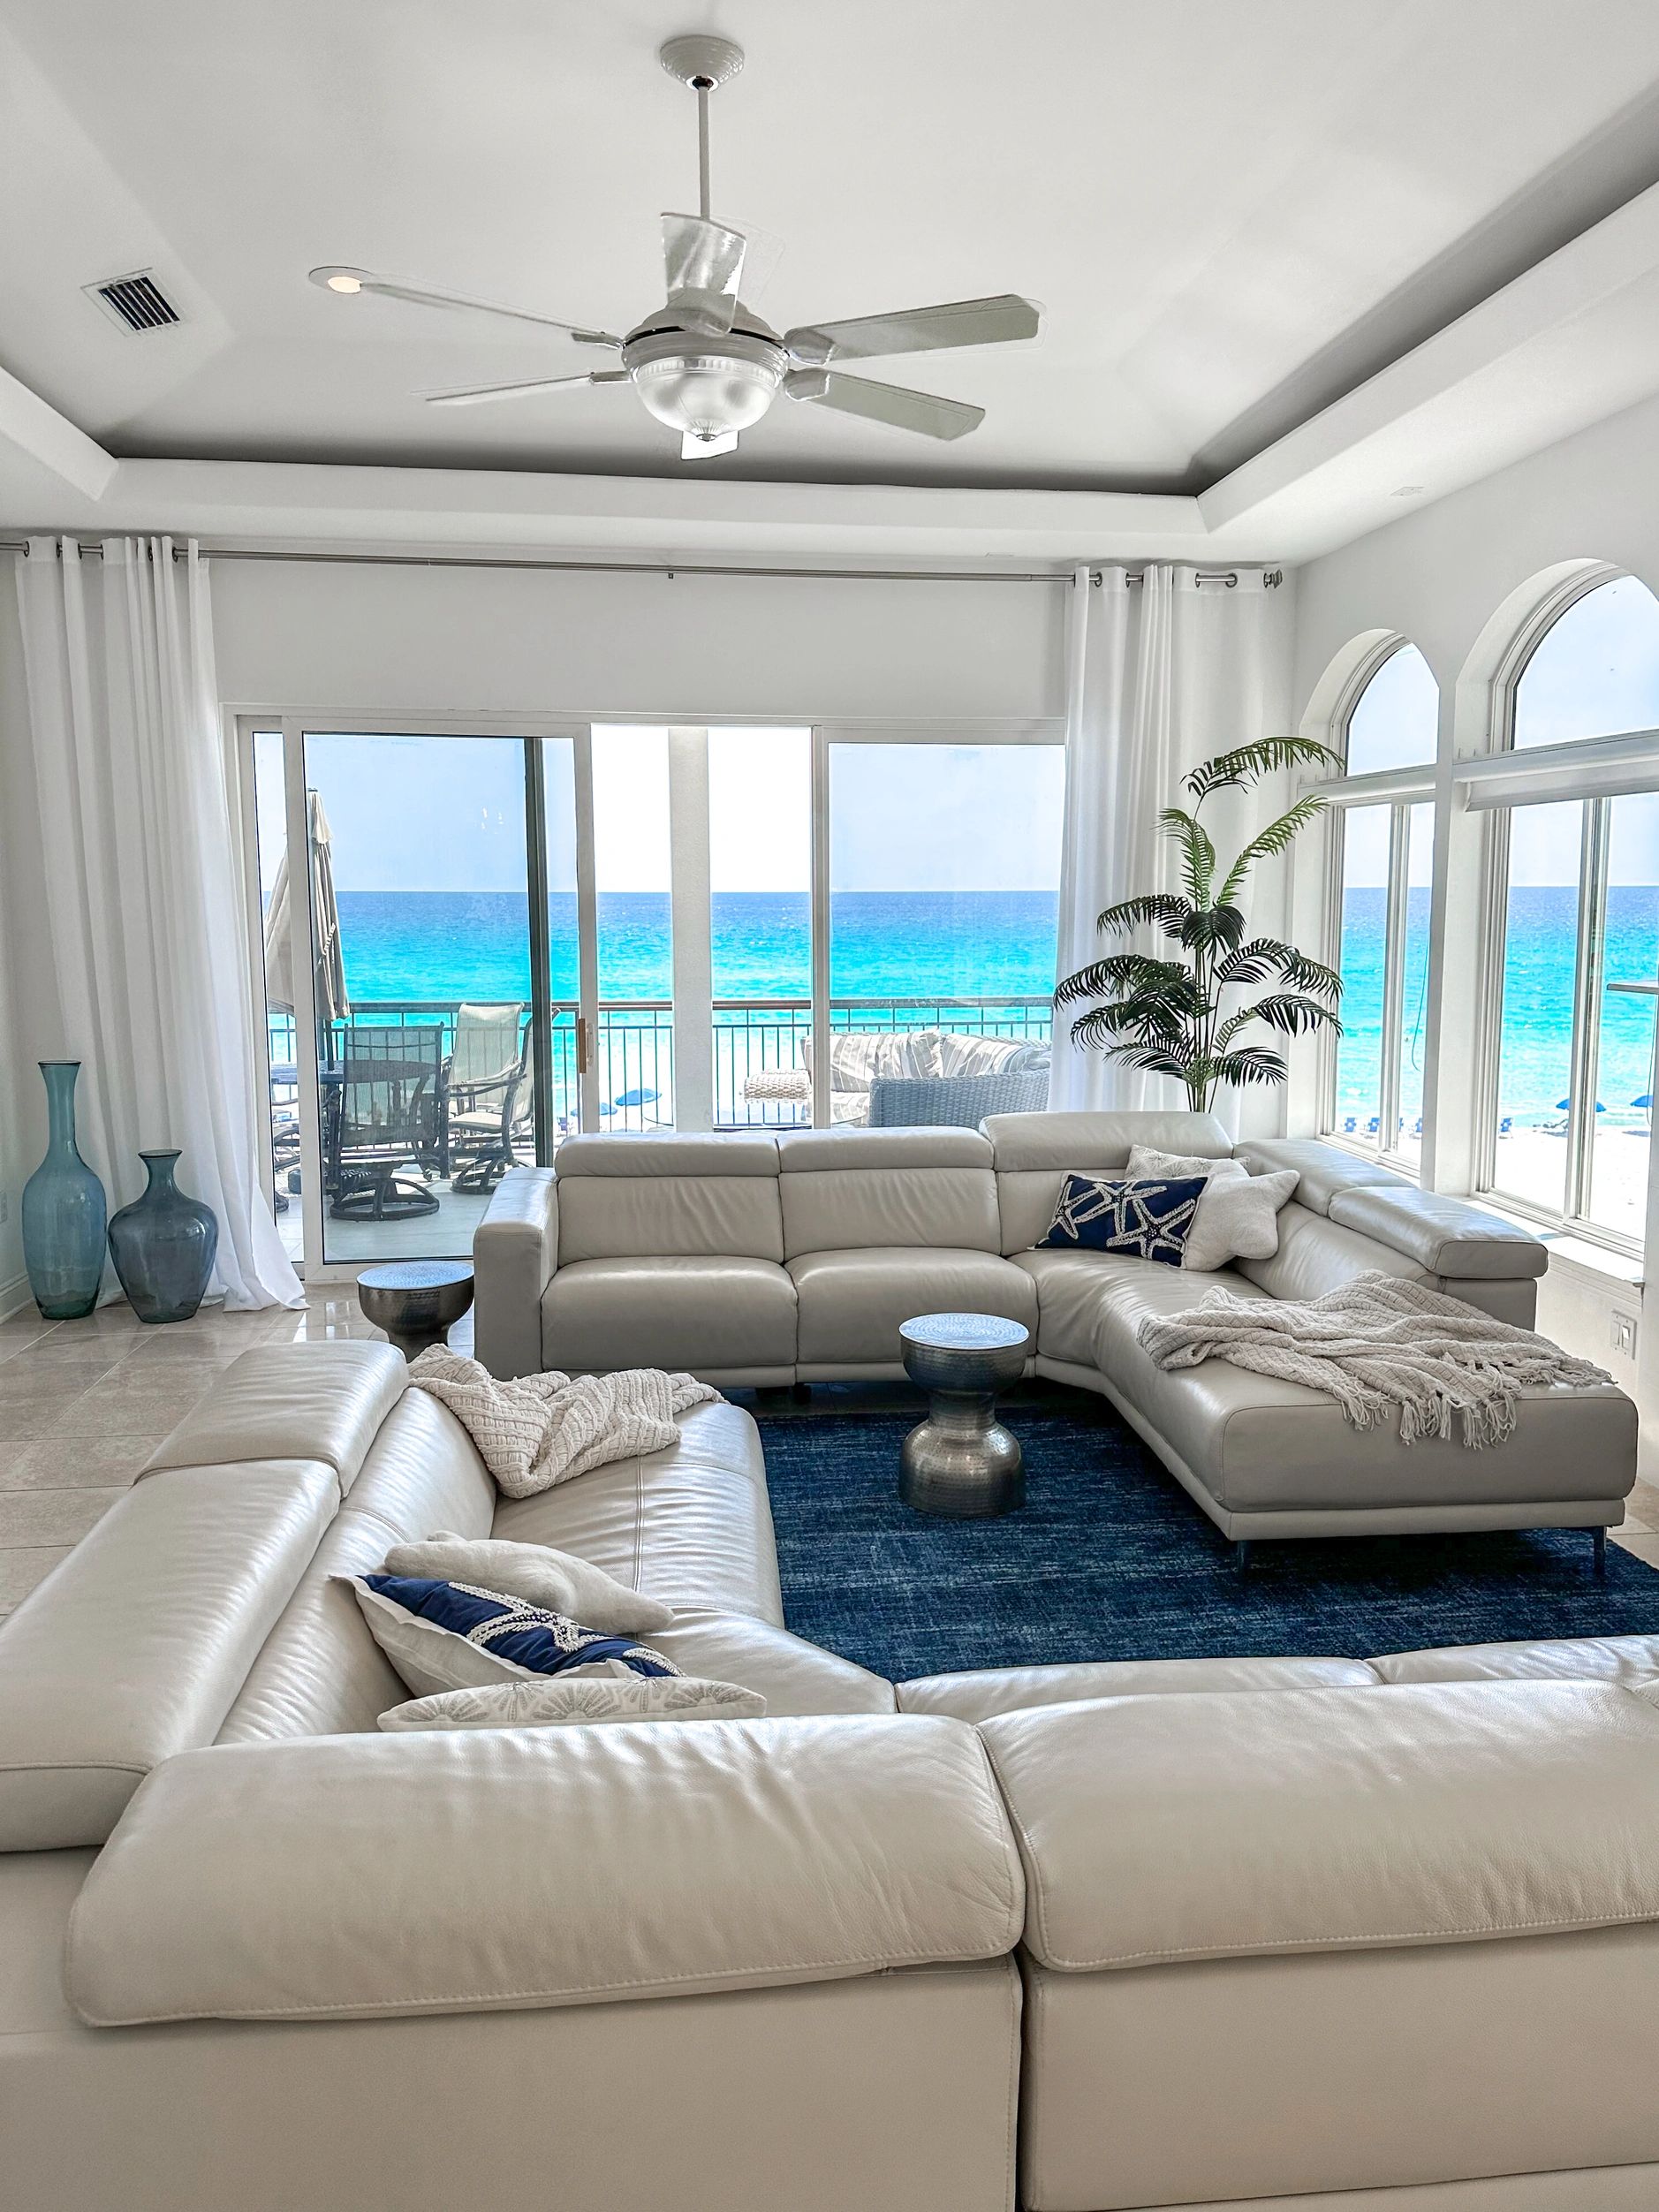 Main living area with amazing gulf views